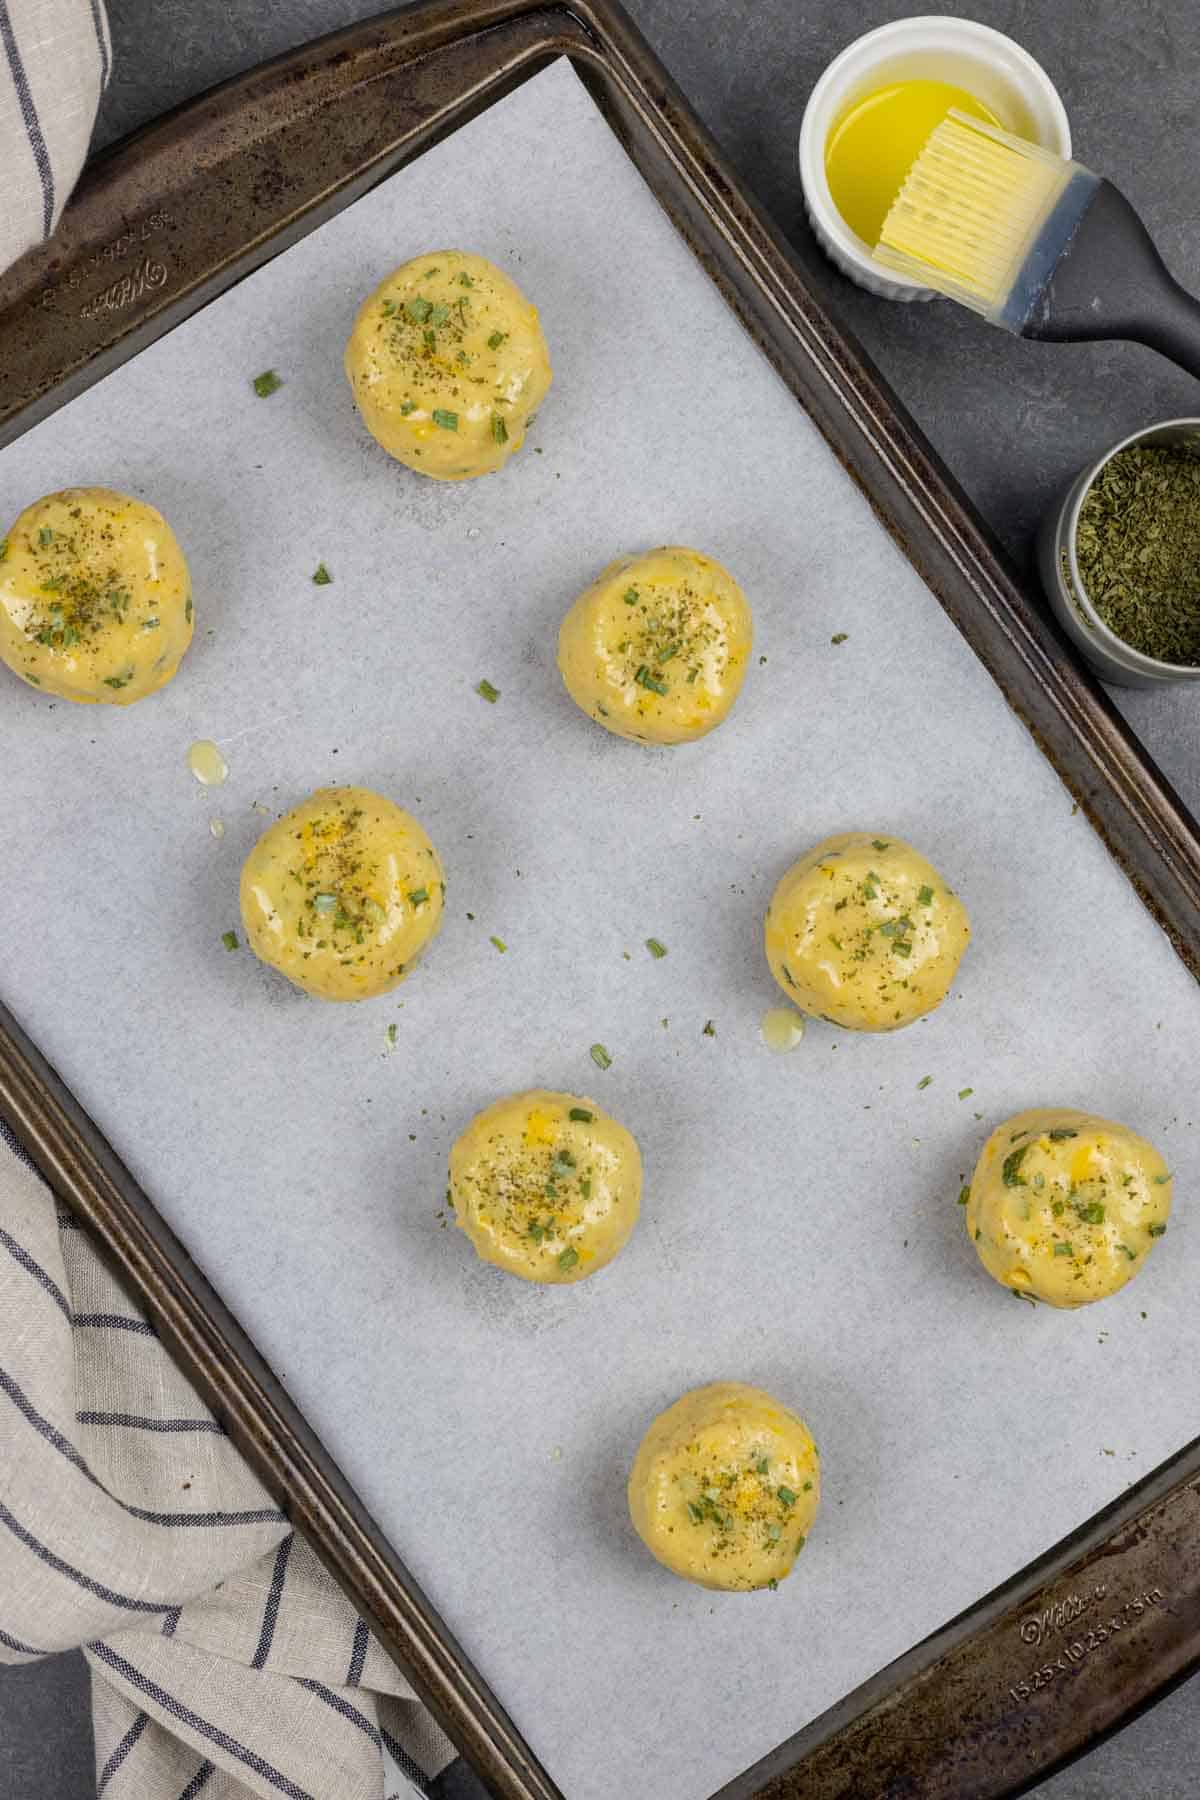 Biscuit dough buttered and sprinkled with herbs on a baking sheet ready to go in the oven.  Captioned with instructions.